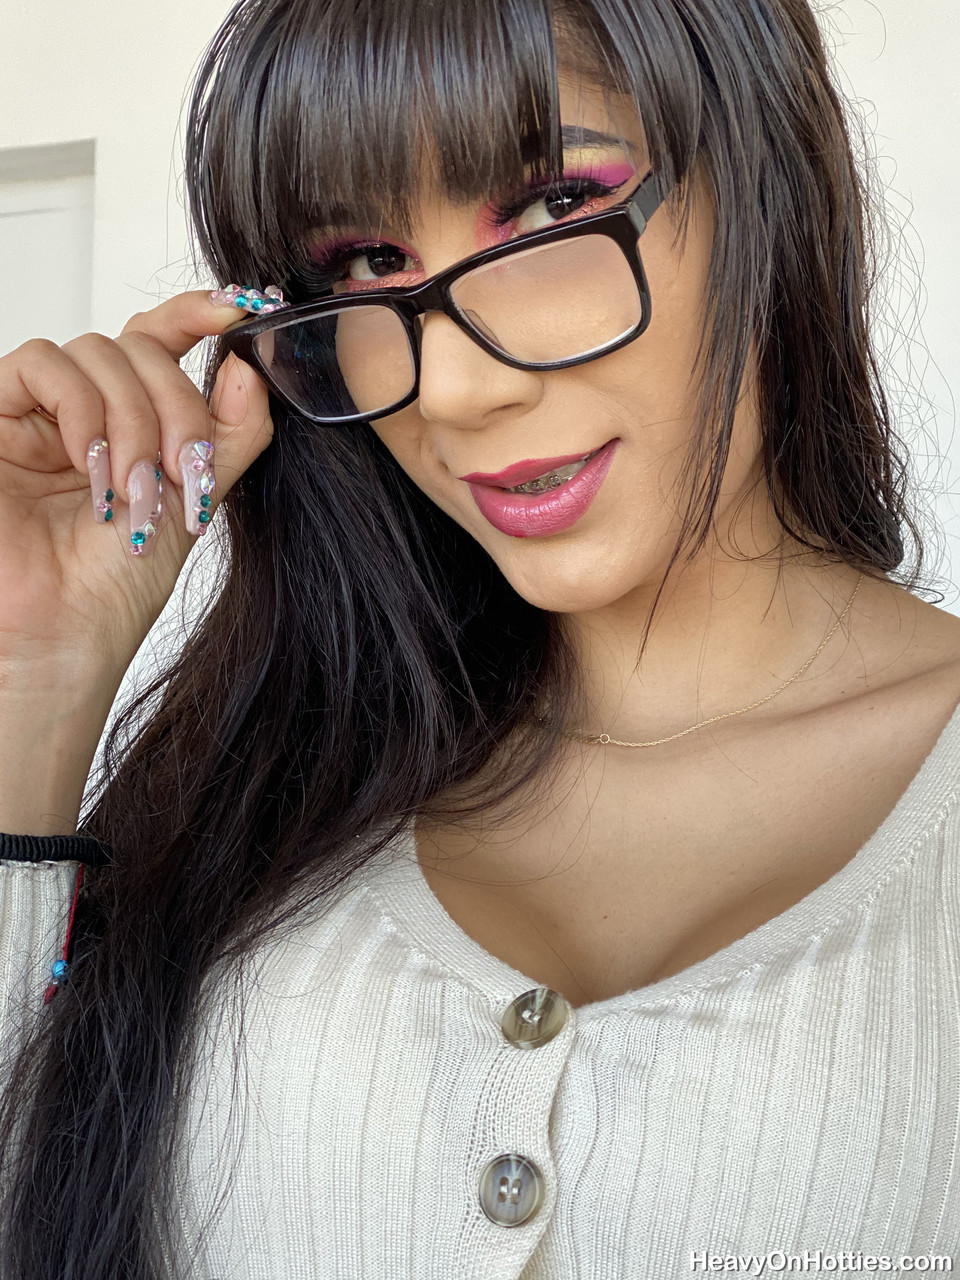 Sexy brunette Mia Marin strips to her shoes and glasses before POV action ポルノ写真 #424700857 | Heavy On Hotties Pics, Mia Marin, POV, モバイルポルノ